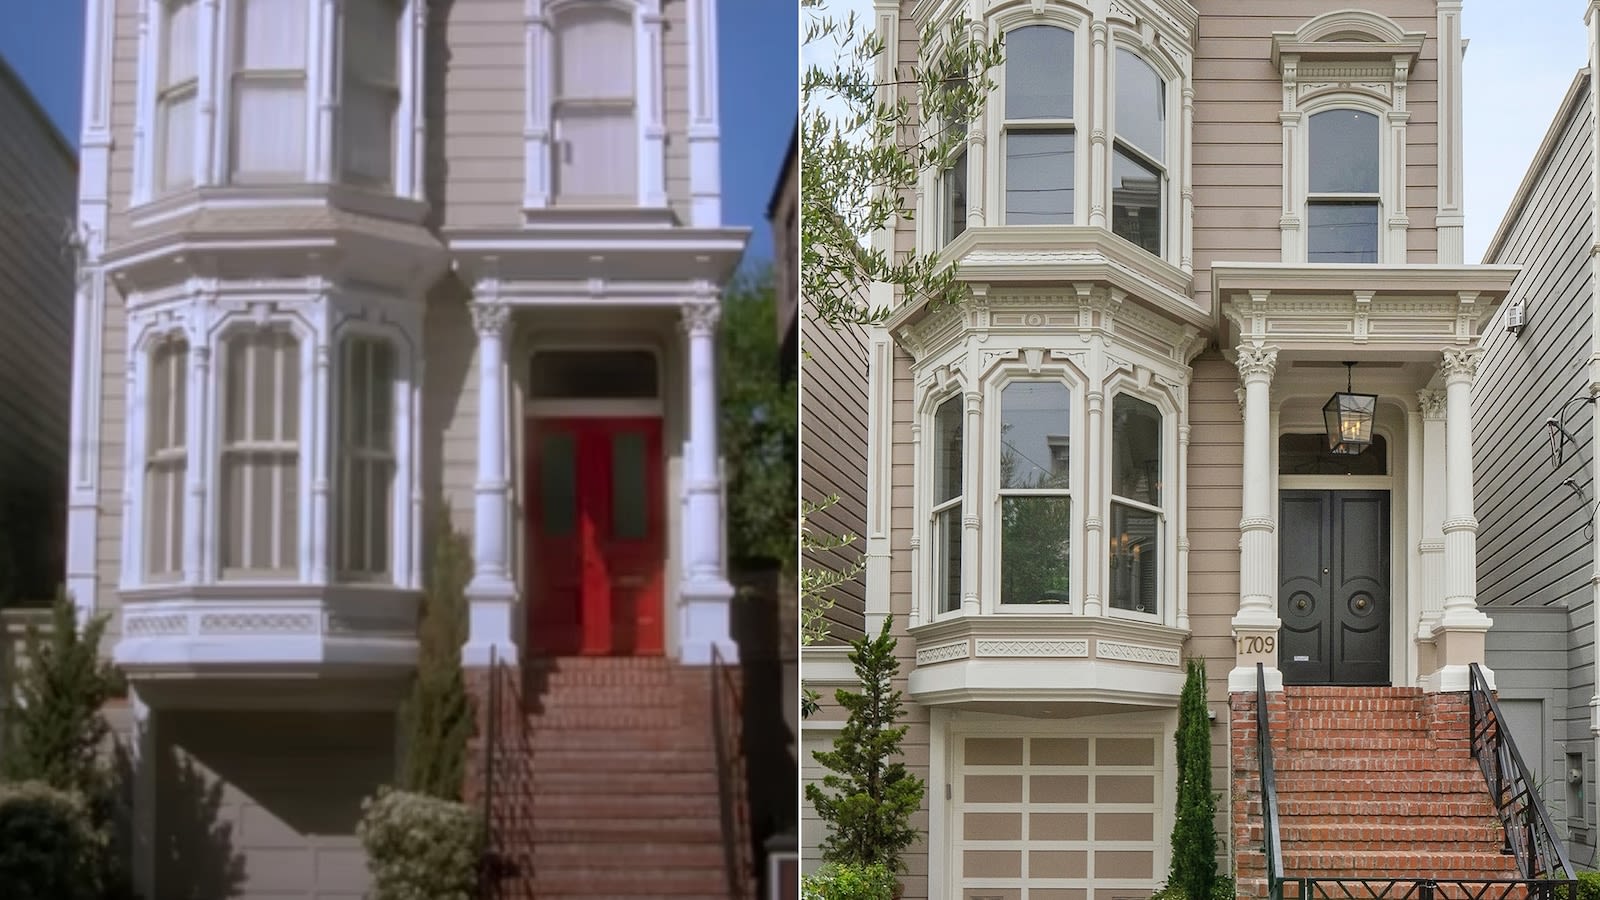 Remodeled 'Full House' Victorian property hits the market: See photos